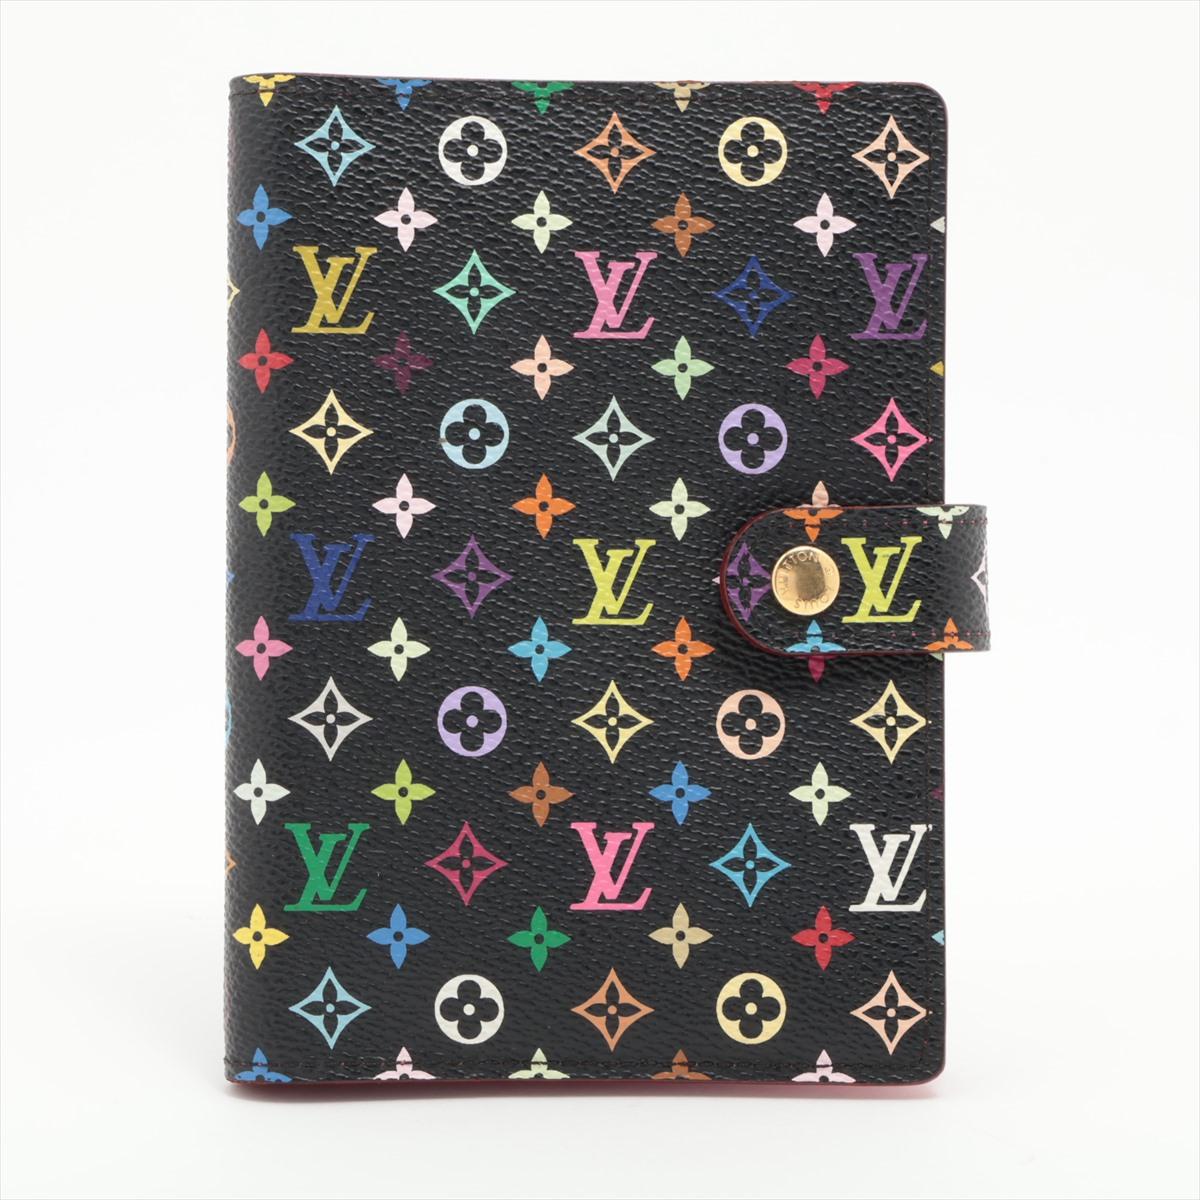 The Louis Vuitton Monogram Multicolor Agenda PM in classic black a chic and functional accessory that seamlessly combines style and organization. The agenda showcases Louis Vuitton's iconic Monogram Multicolor canvas, a vibrant and eye-catching